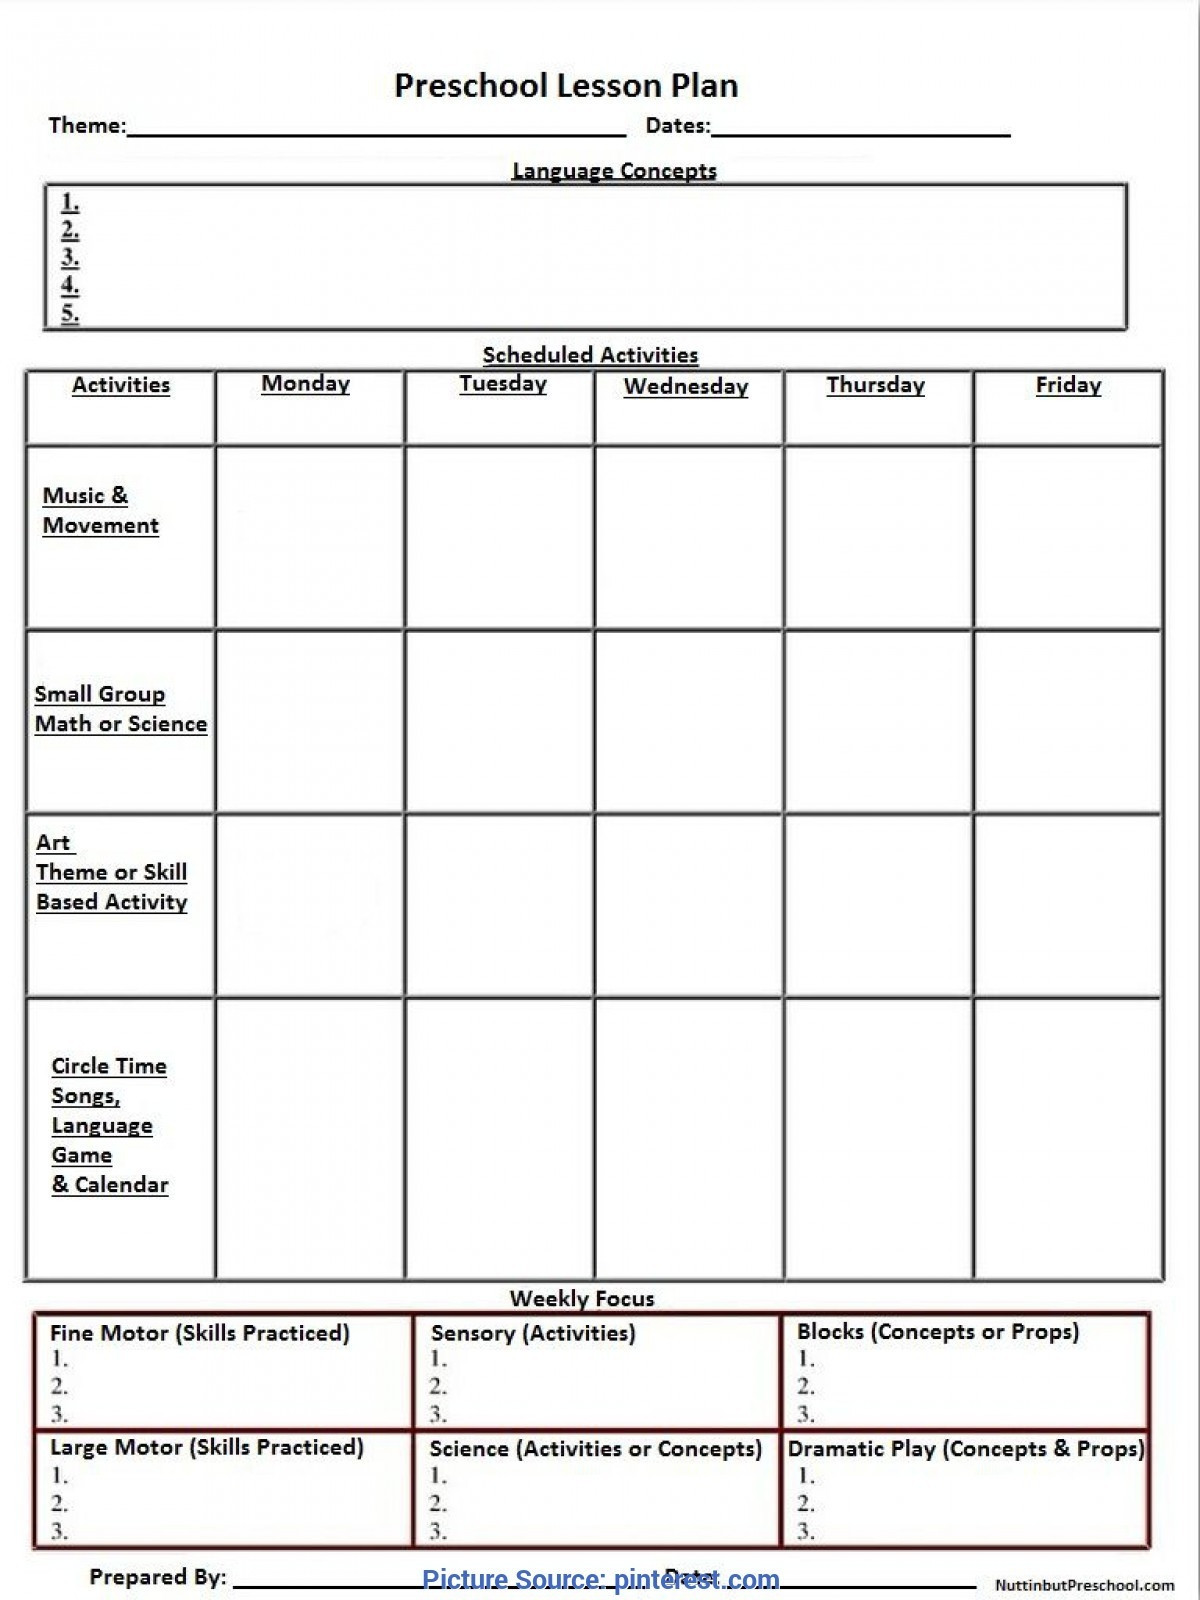 Free Preschool Weekly Lesson Plans Daycare Weekly Lesson Plan Template